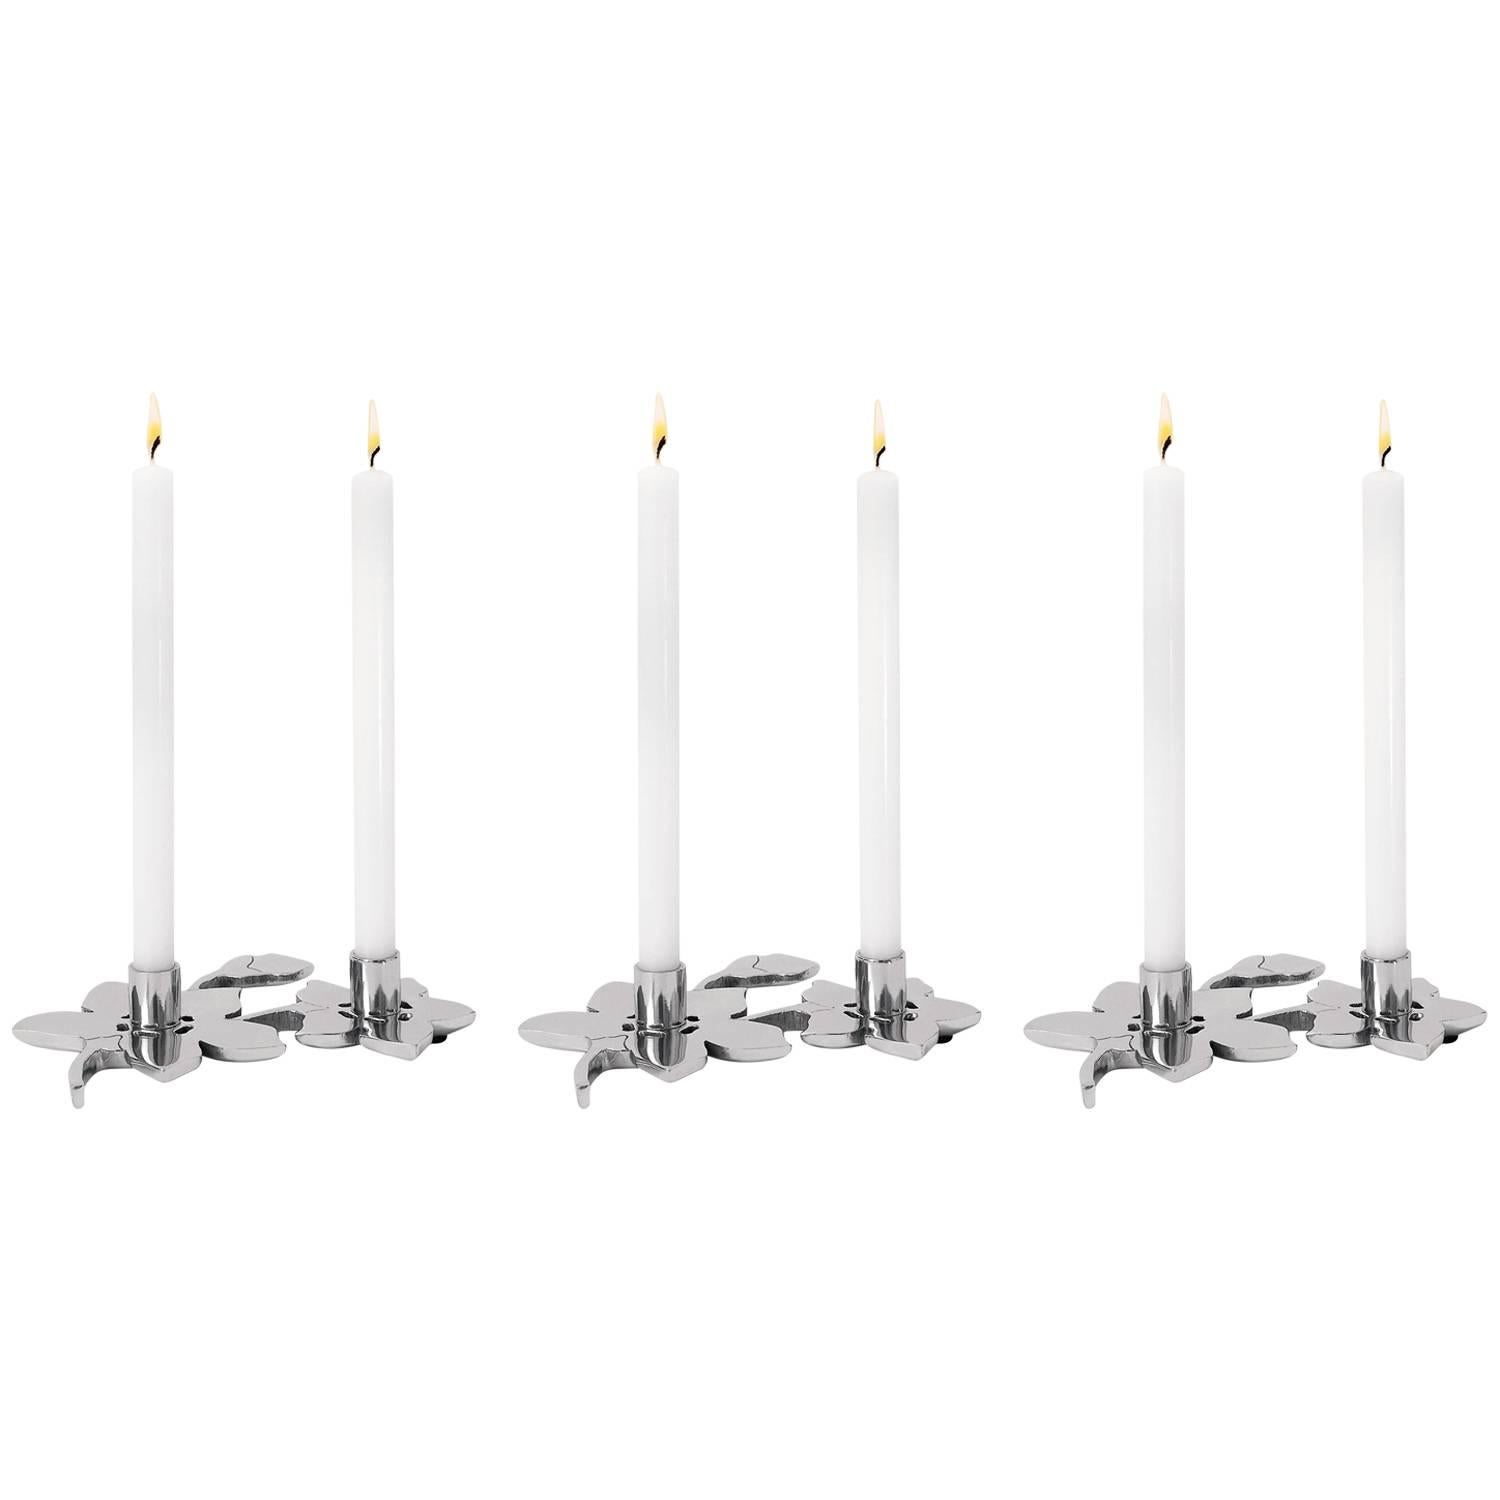 Spring Is Coming II Aluminium Six-Piece Candleholder by Laudani & Romanelli For Sale